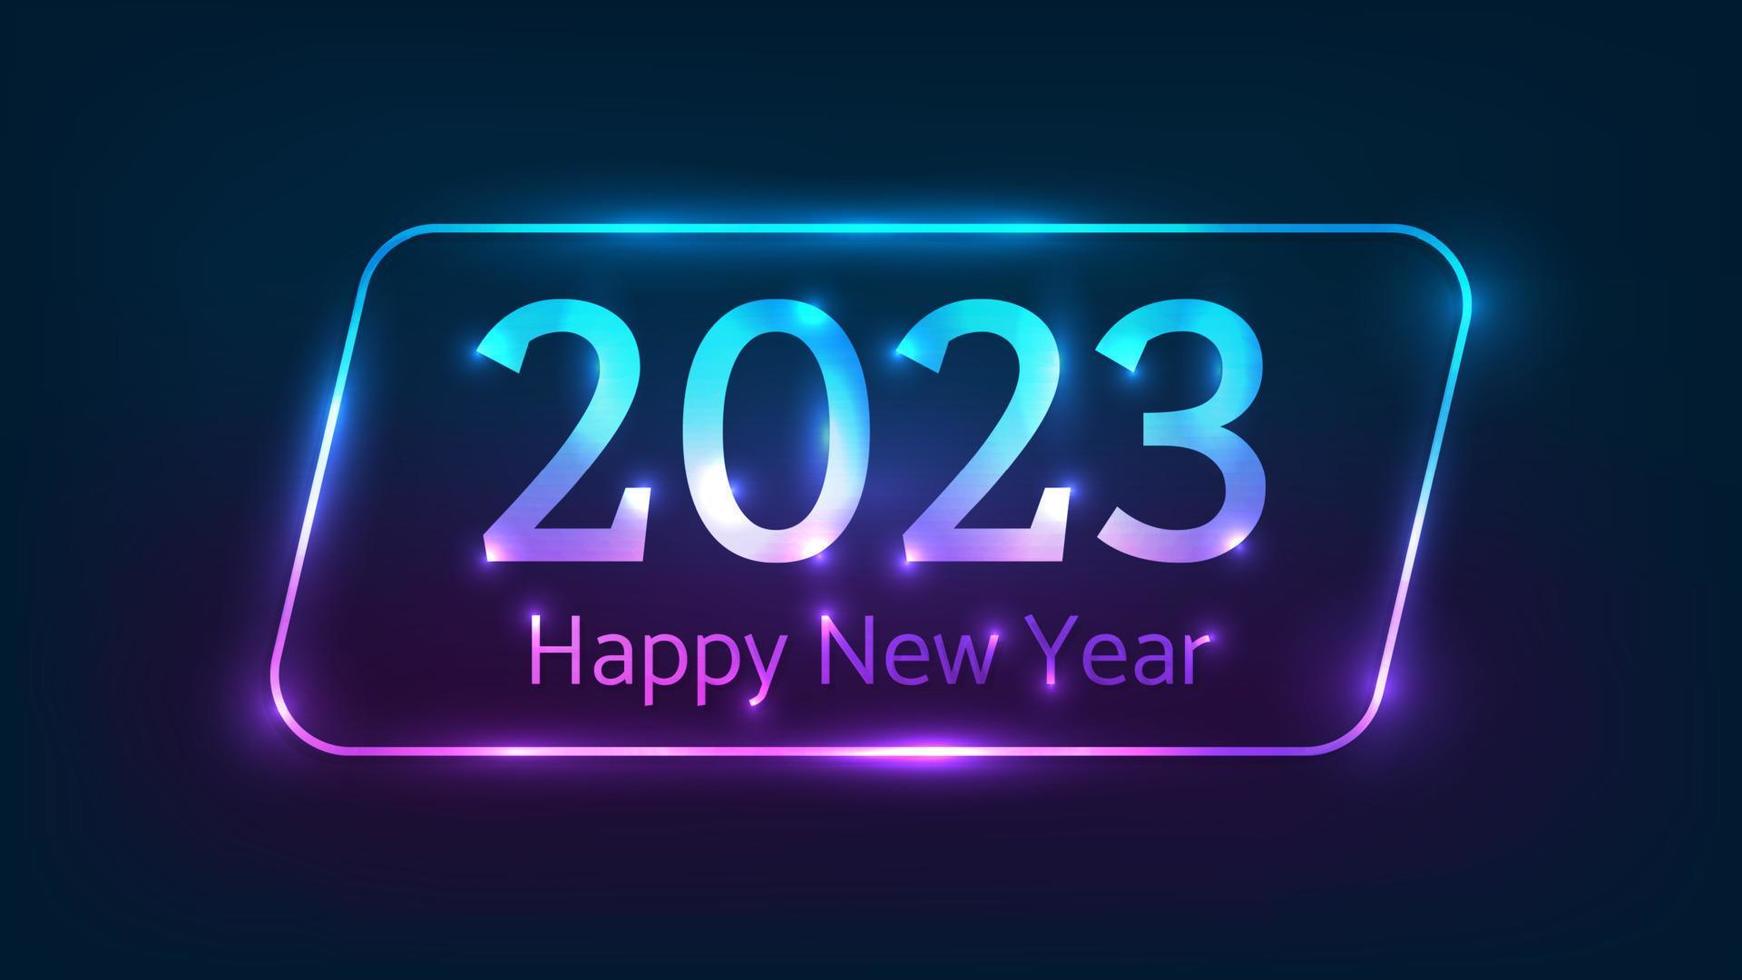 2023 Happy New Year neon background. Neon rounded parallelogram frame with shining effects for Christmas holiday greeting card, flyers or posters. Vector illustration